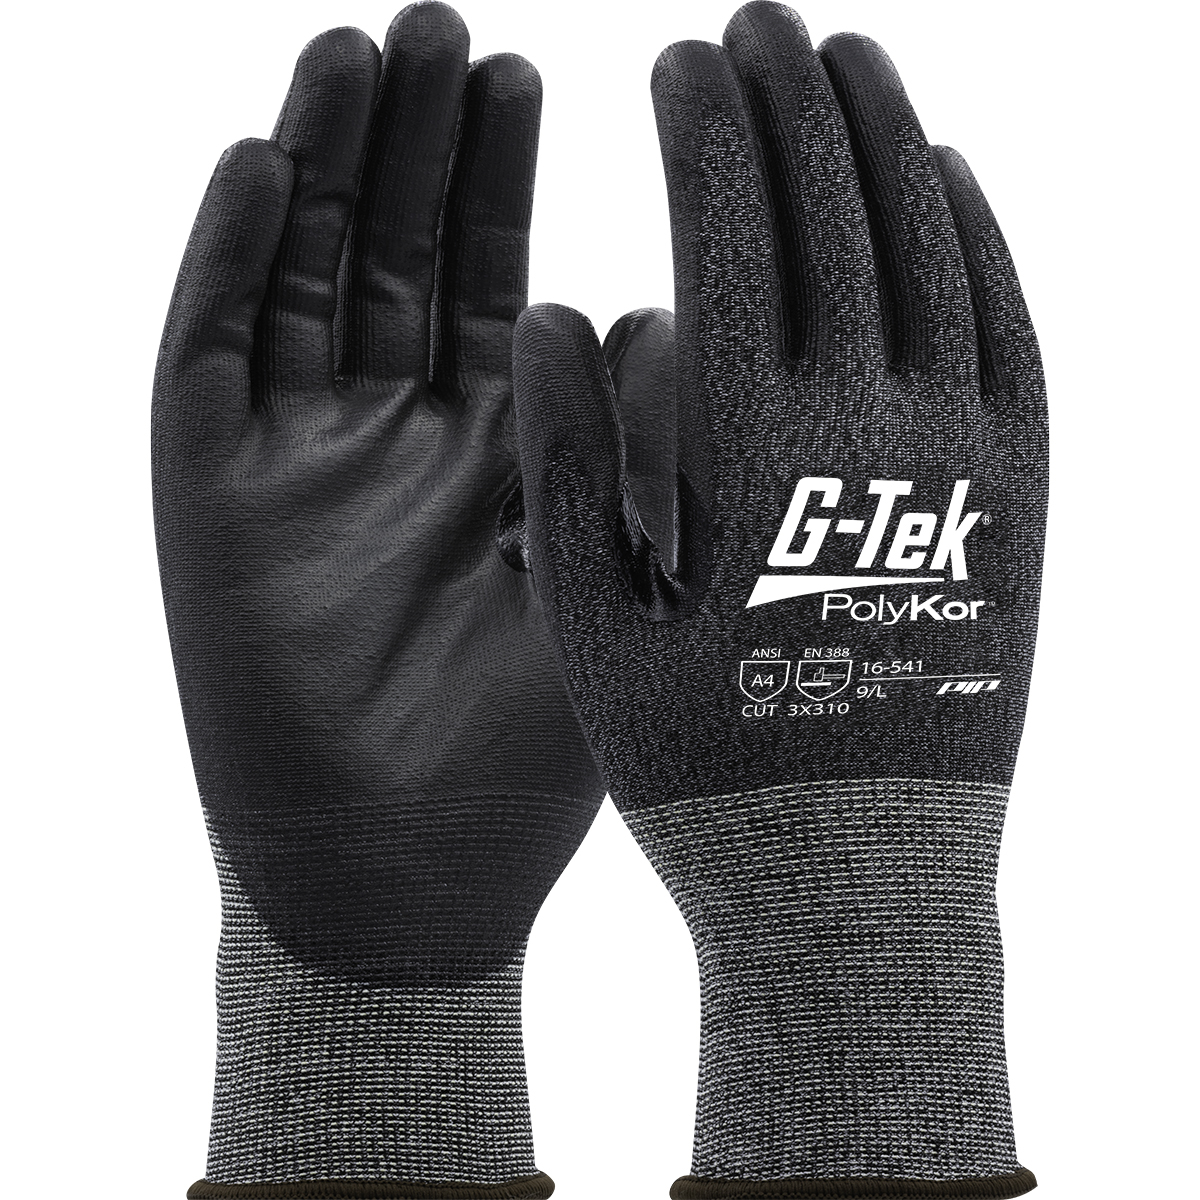 G-Tek® PolyKor® - Seamless Knit PolyKor® Blended Glove with Polyurethane Coated Flat Grip on Palm & Fingers - 21 Gauge - Touchscreen Compatible.